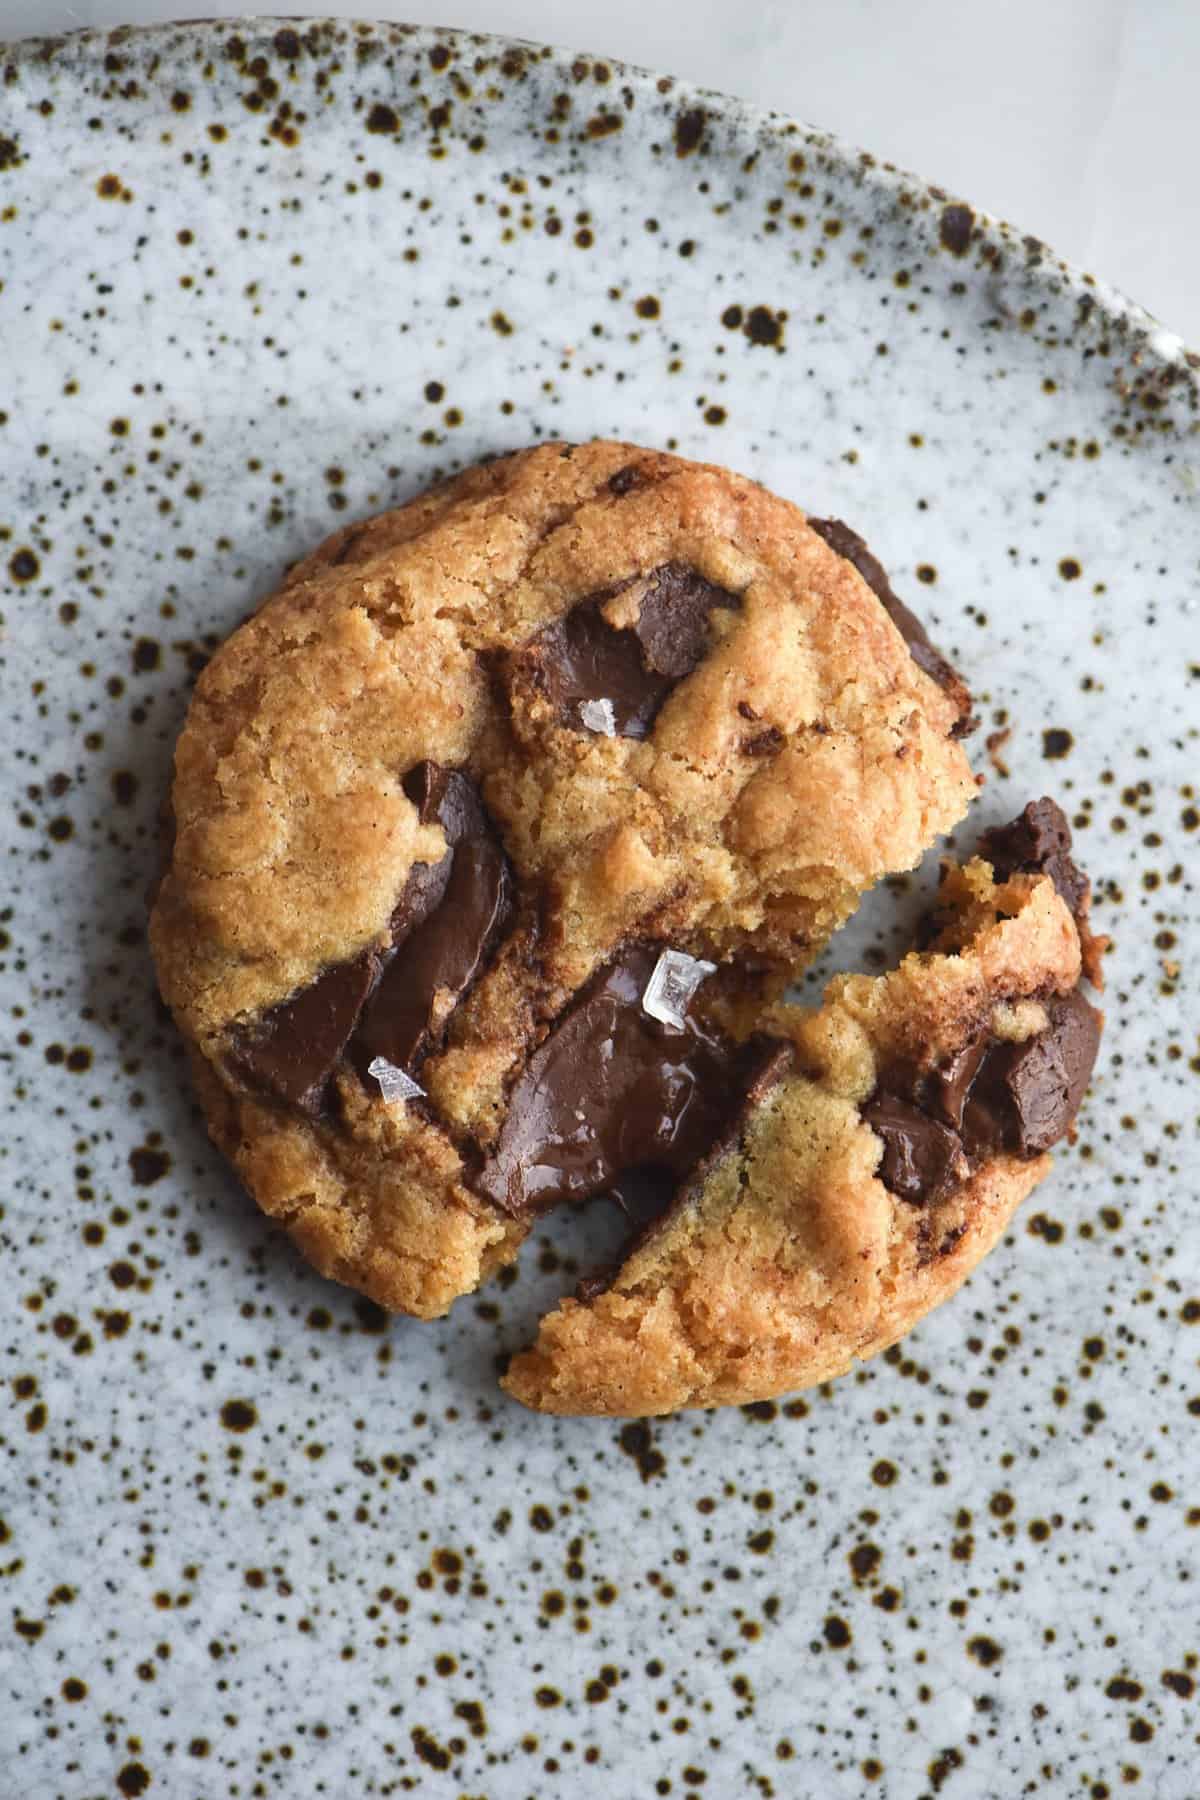 An aerial view of a gluten free vegan choc chip cookie on a white speckled ceramic plate. The cookie has been snapped down the middle, exposing the melted chocolate that lies within. It is topped with a sprinkle of sea salt flakes